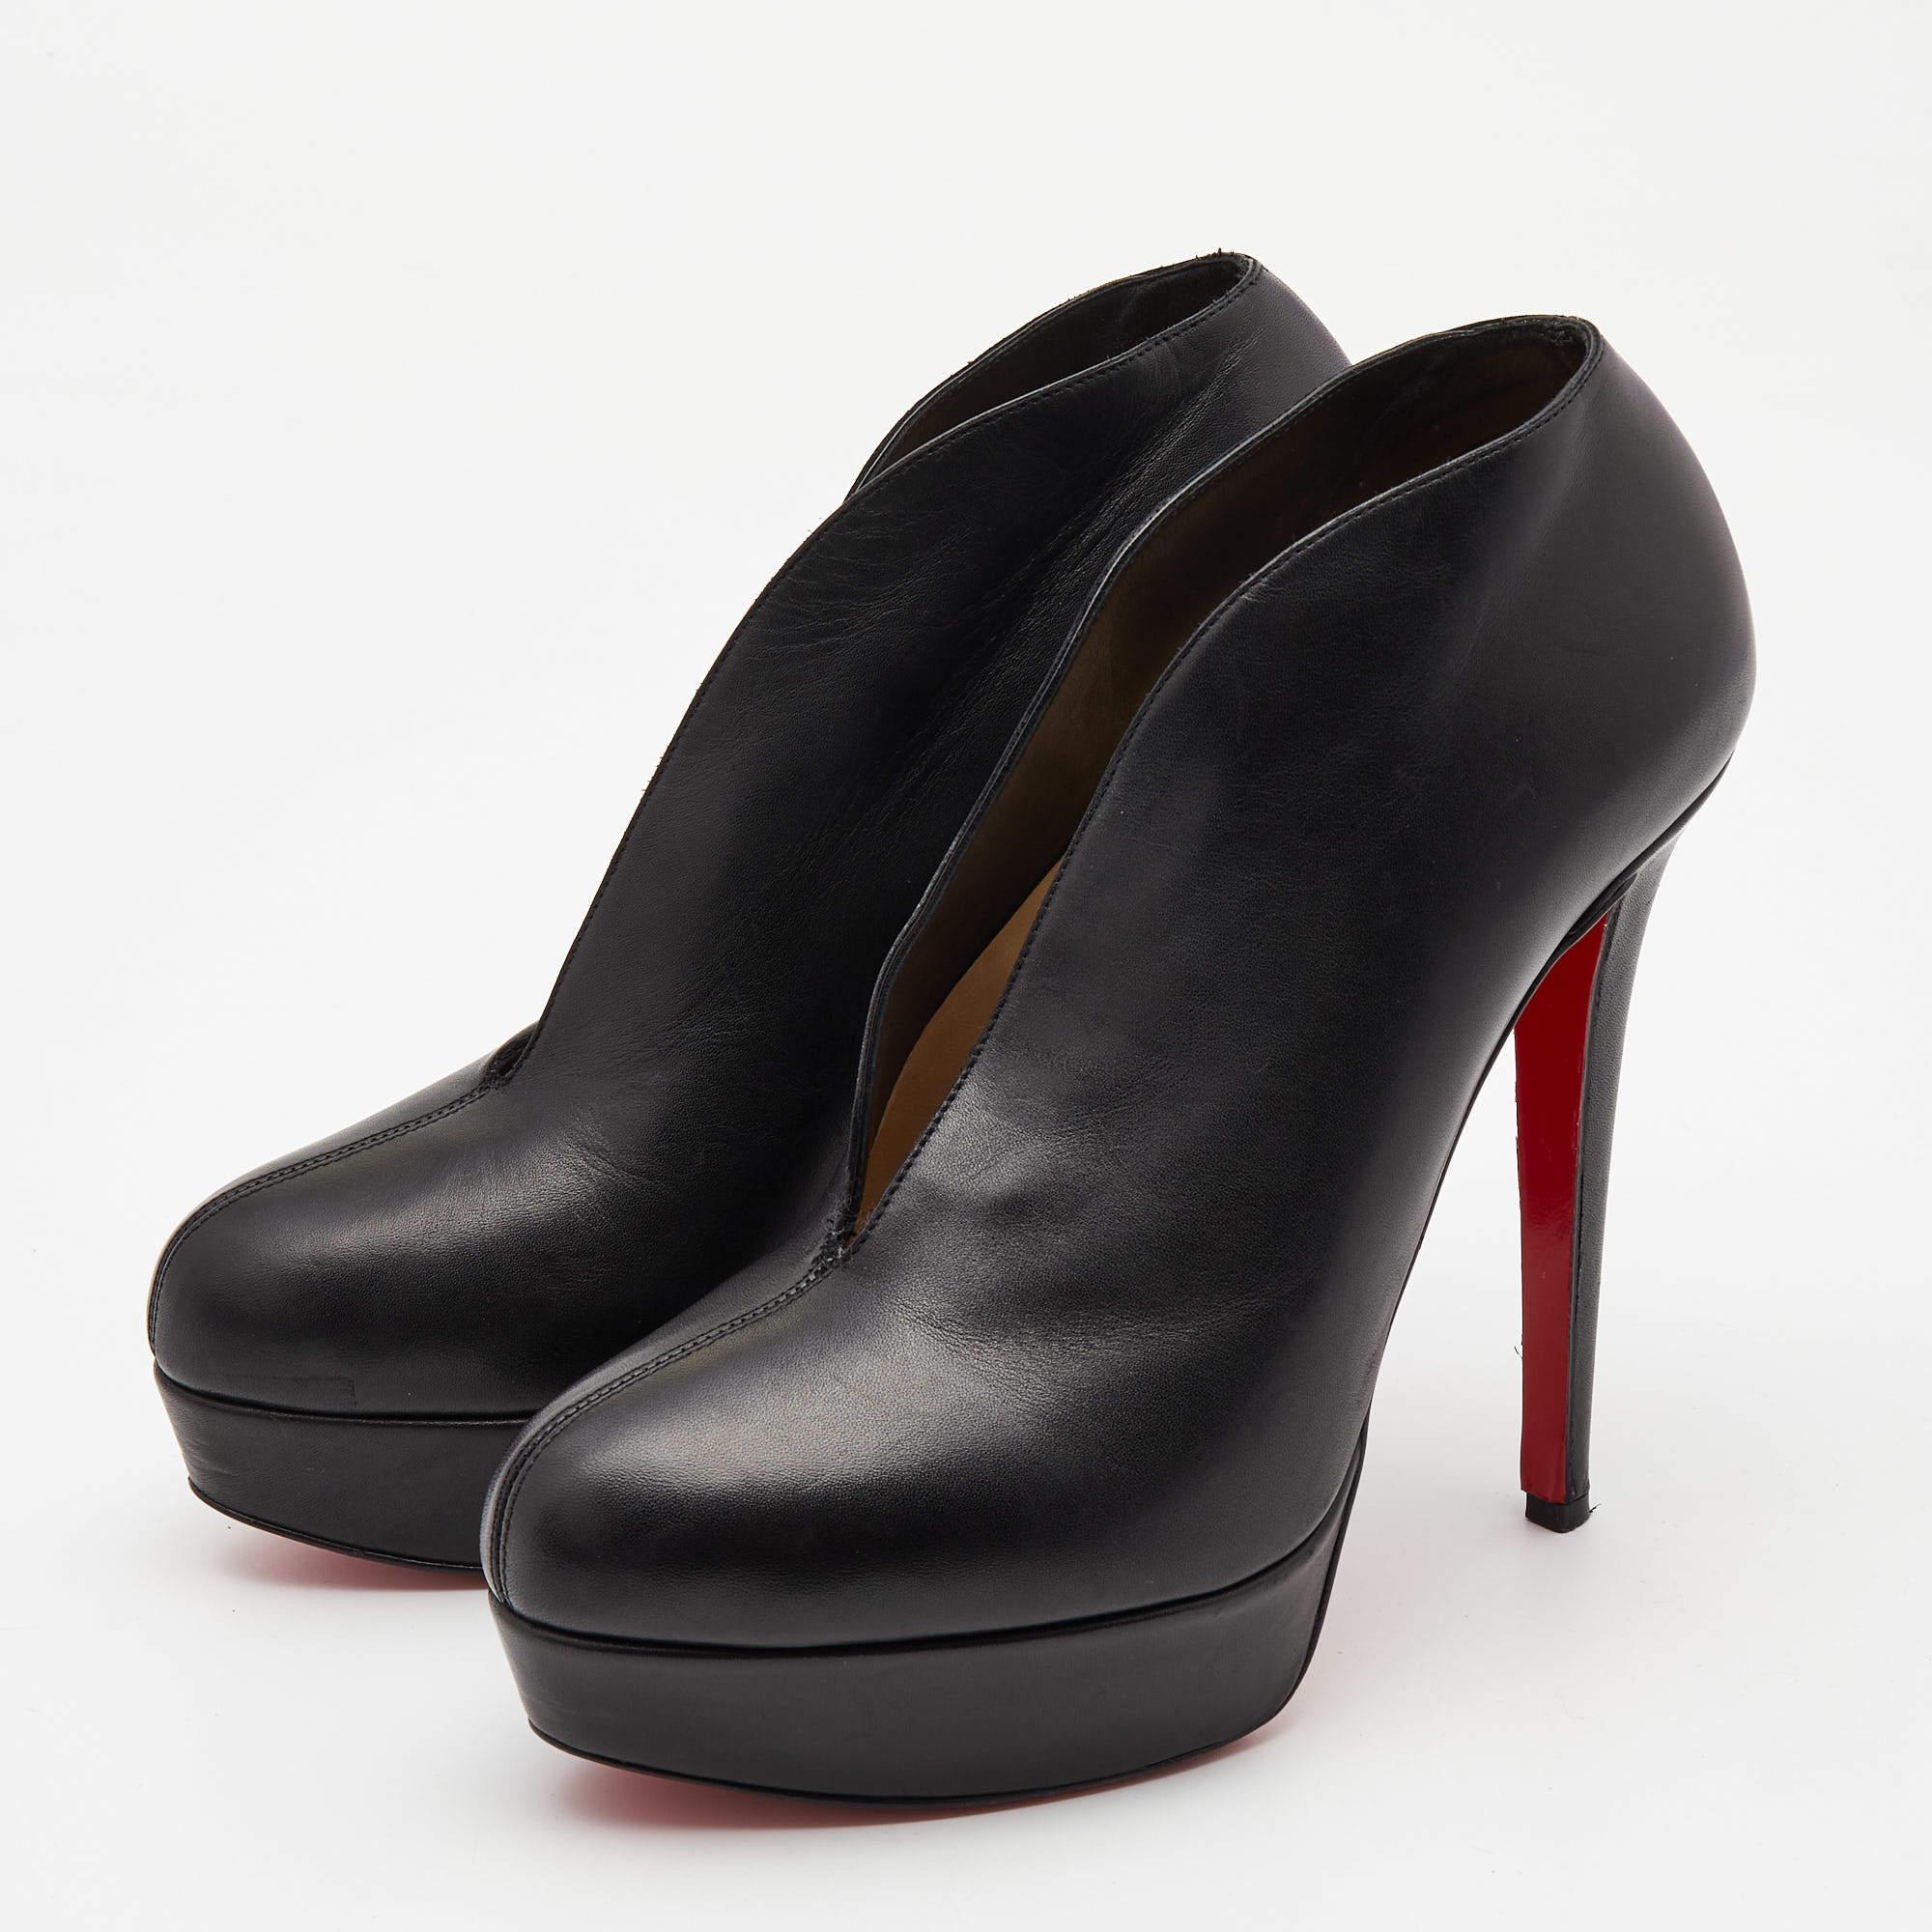 Christian Louboutin Black Leather Miss Fast Plato Platform Ankle Booties Size 38 For Sale 5